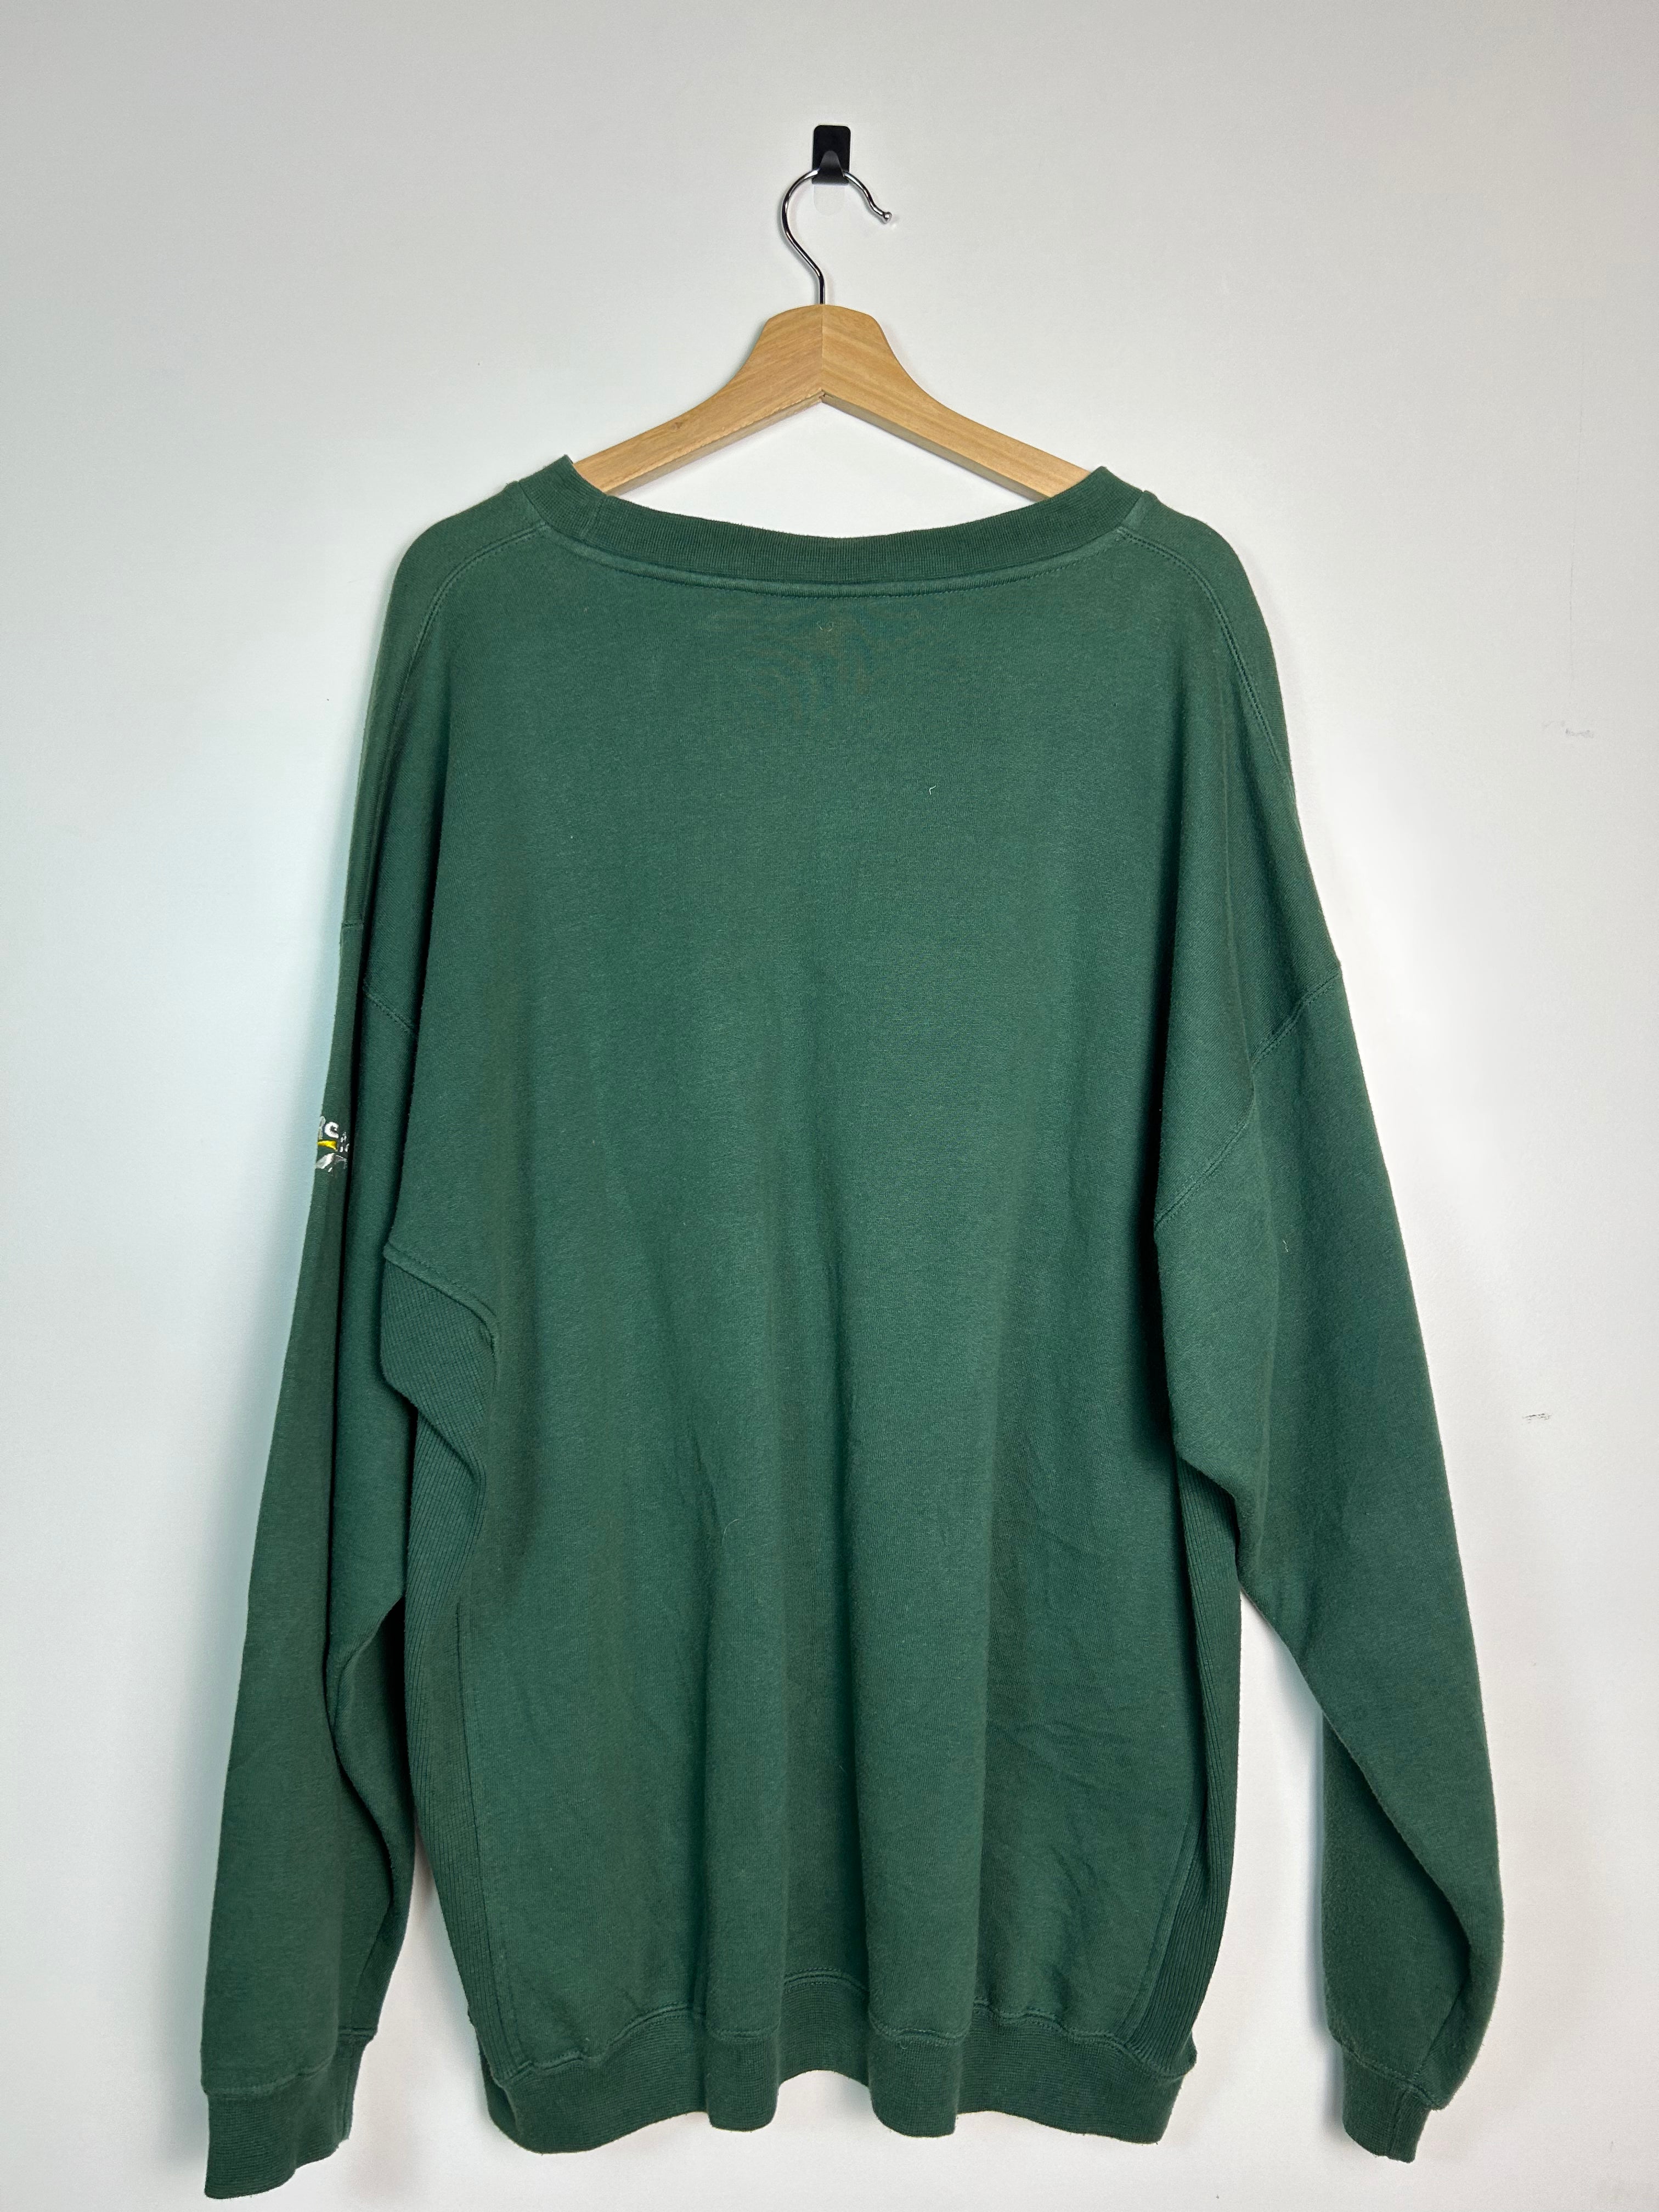 Green Bay packers jumper